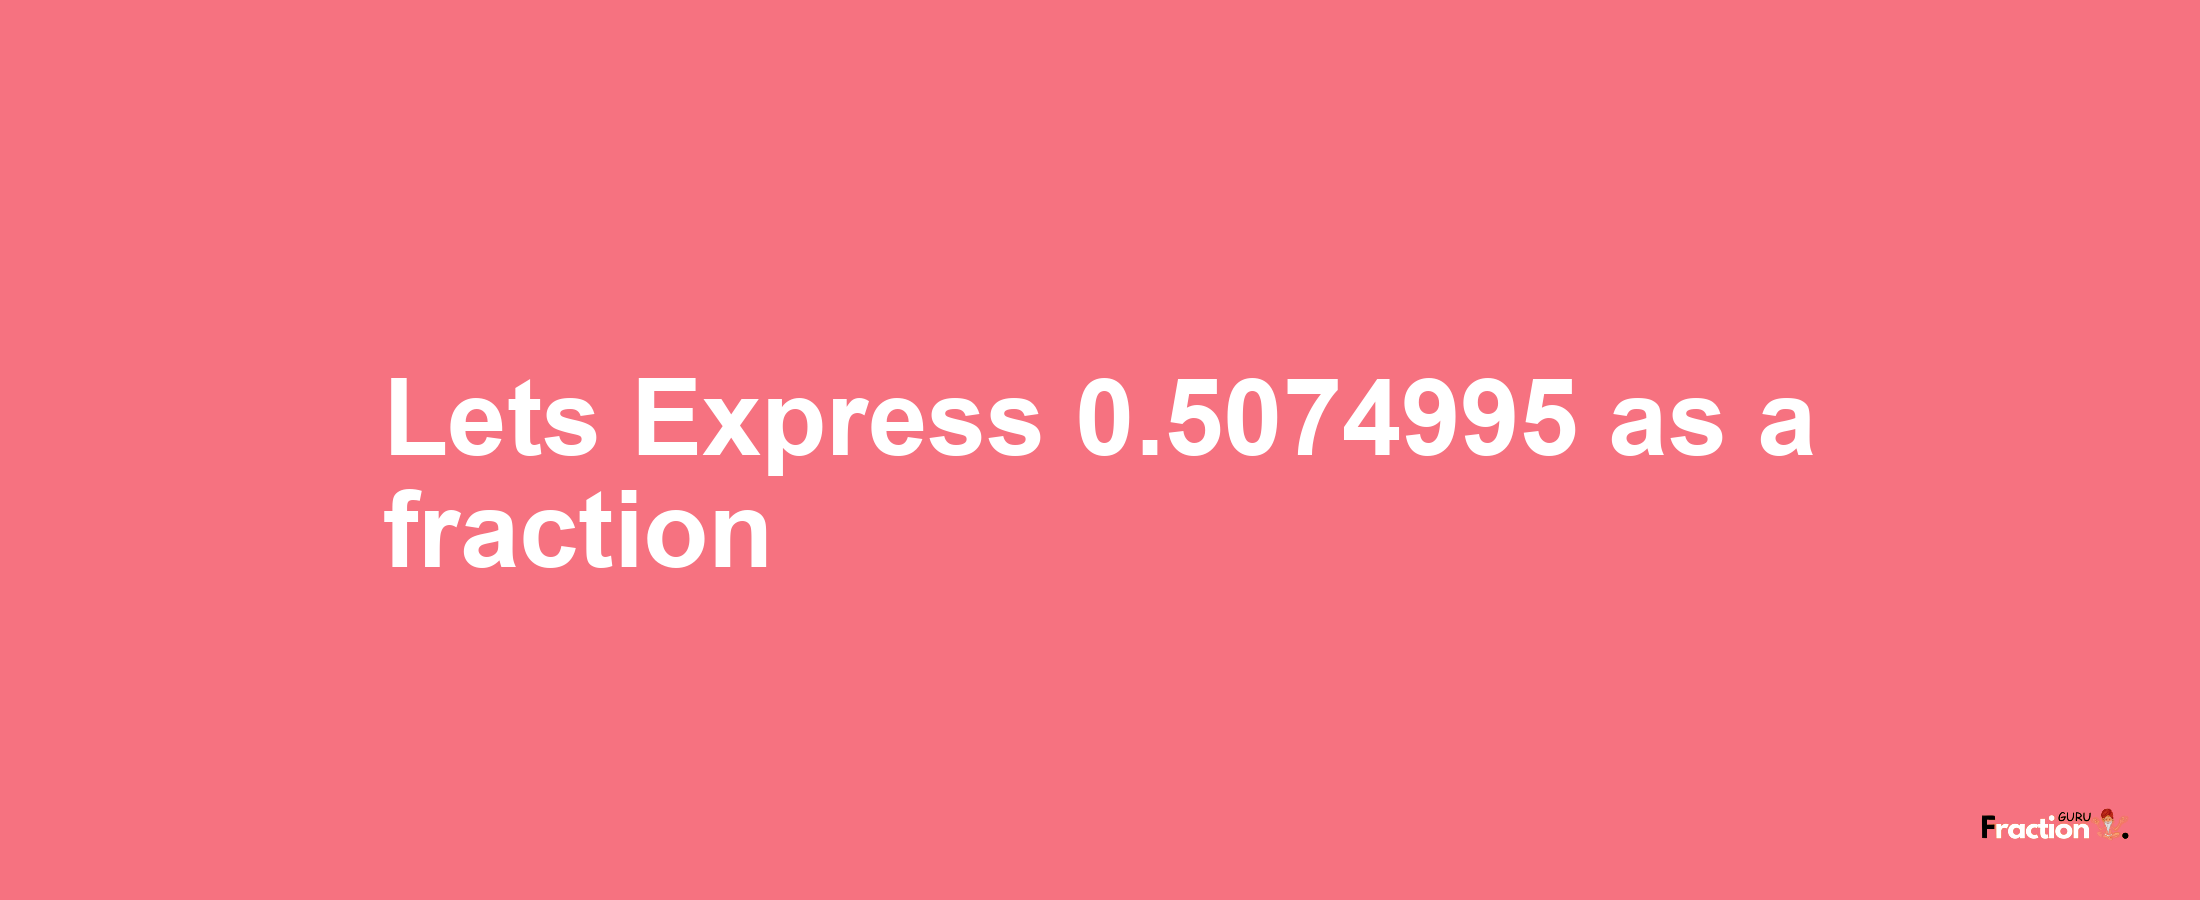 Lets Express 0.5074995 as afraction